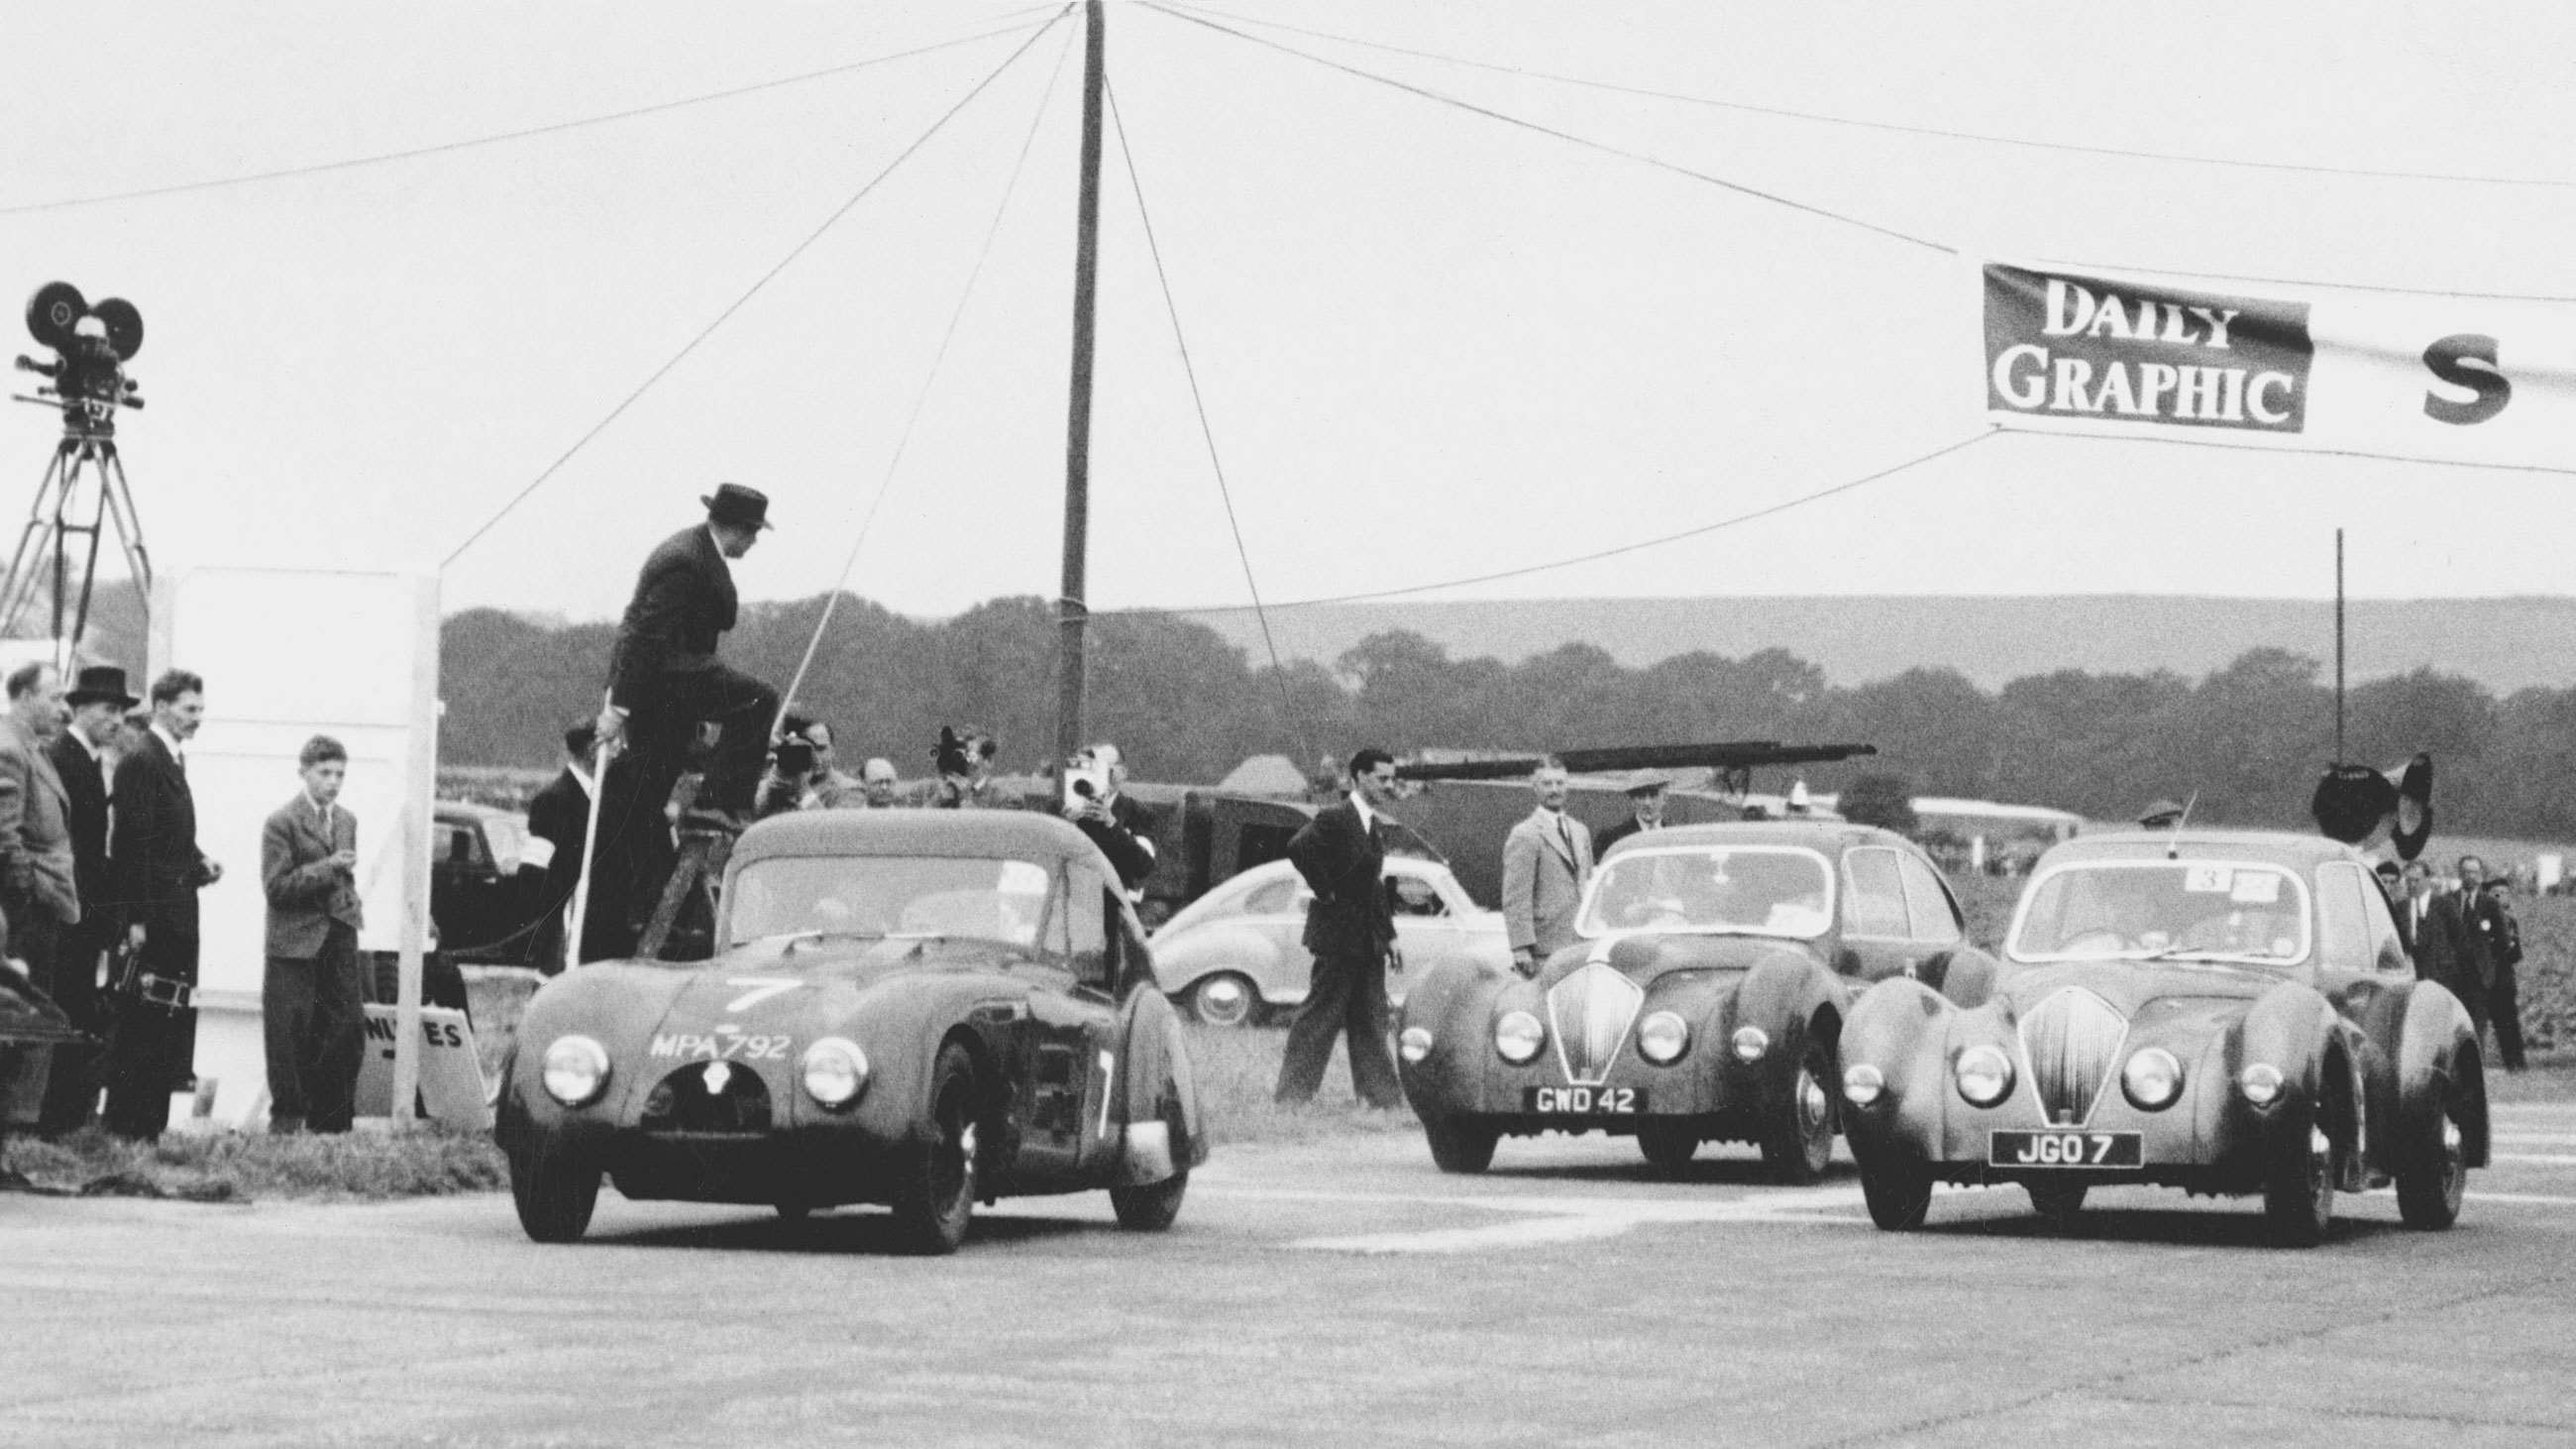 The start of the very first race at Goodwood, September 21st 1948.